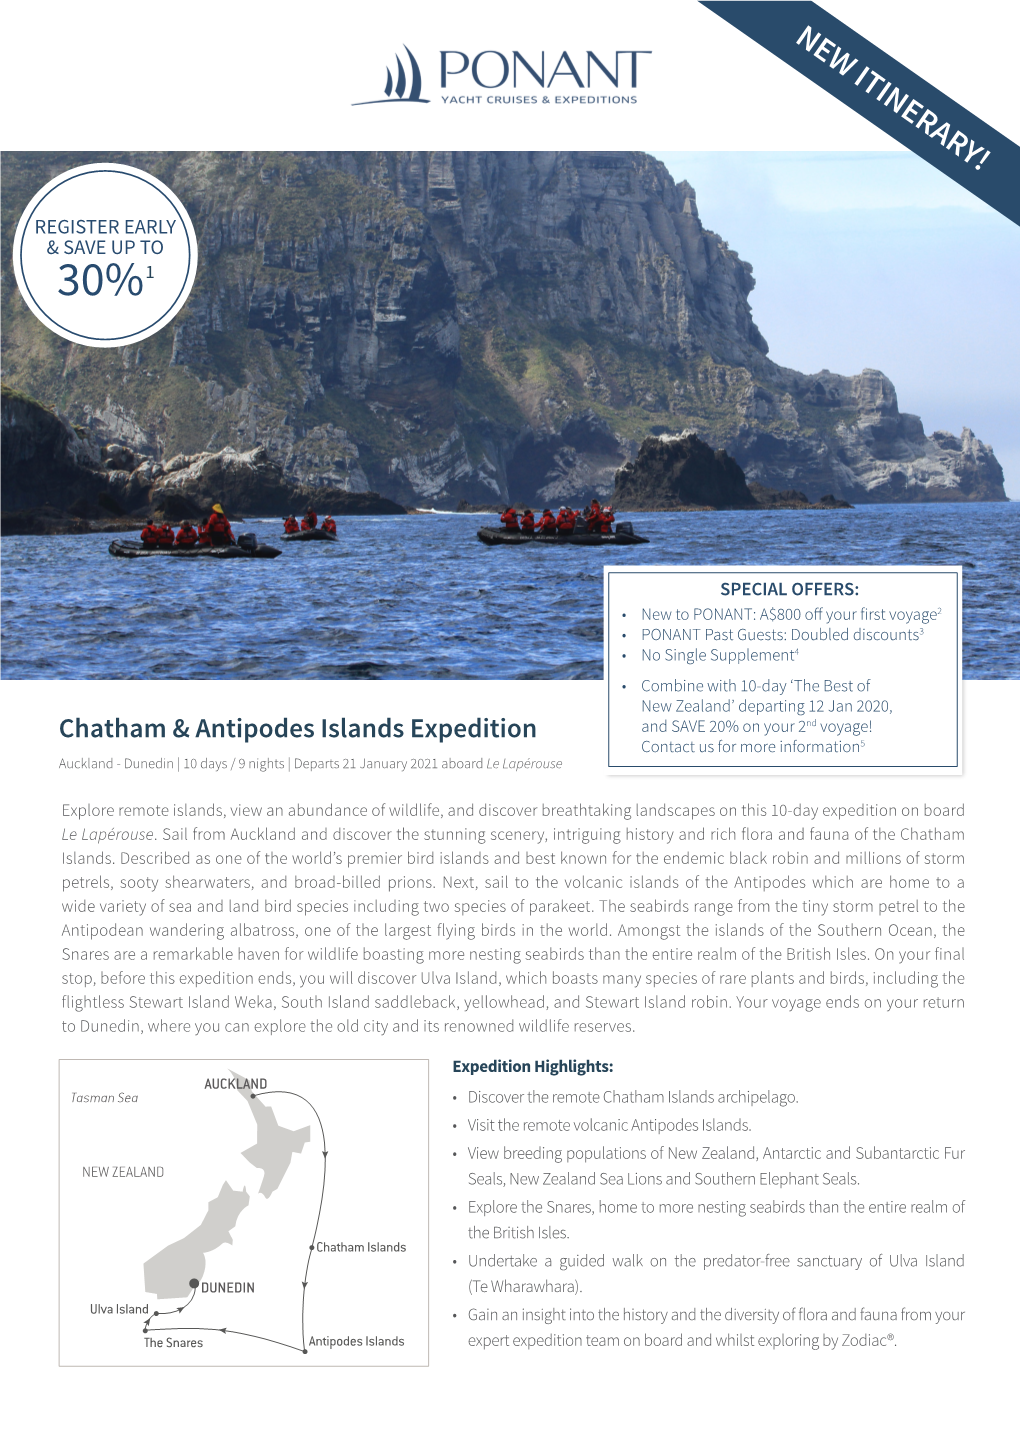 Chatham & Antipodes Islands Expedition